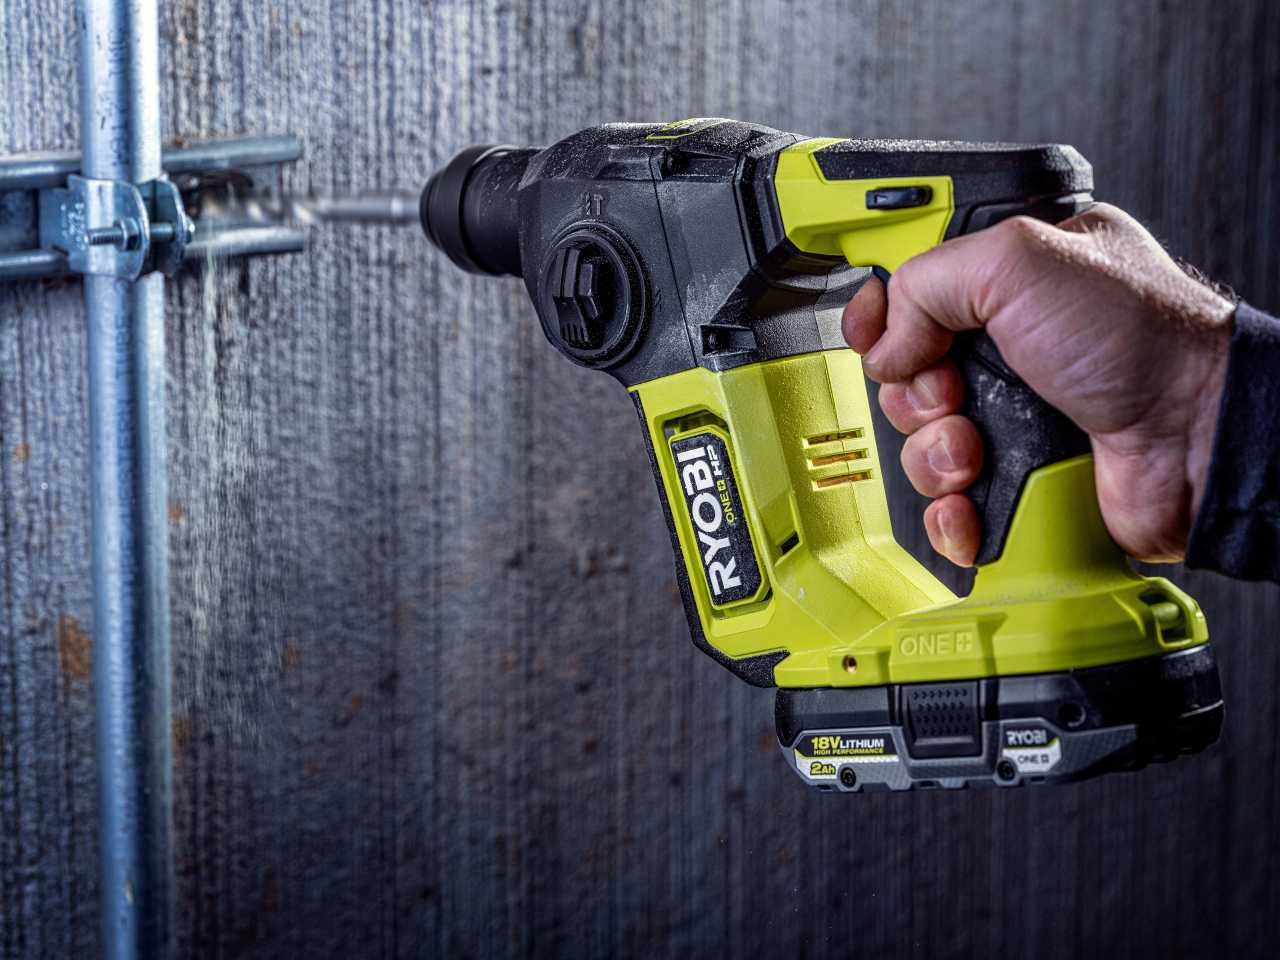 Product Features Image for 18V ONE+ HP COMPACT BRUSHLESS 5/8" SDS-PLUS ROTARY HAMMER.